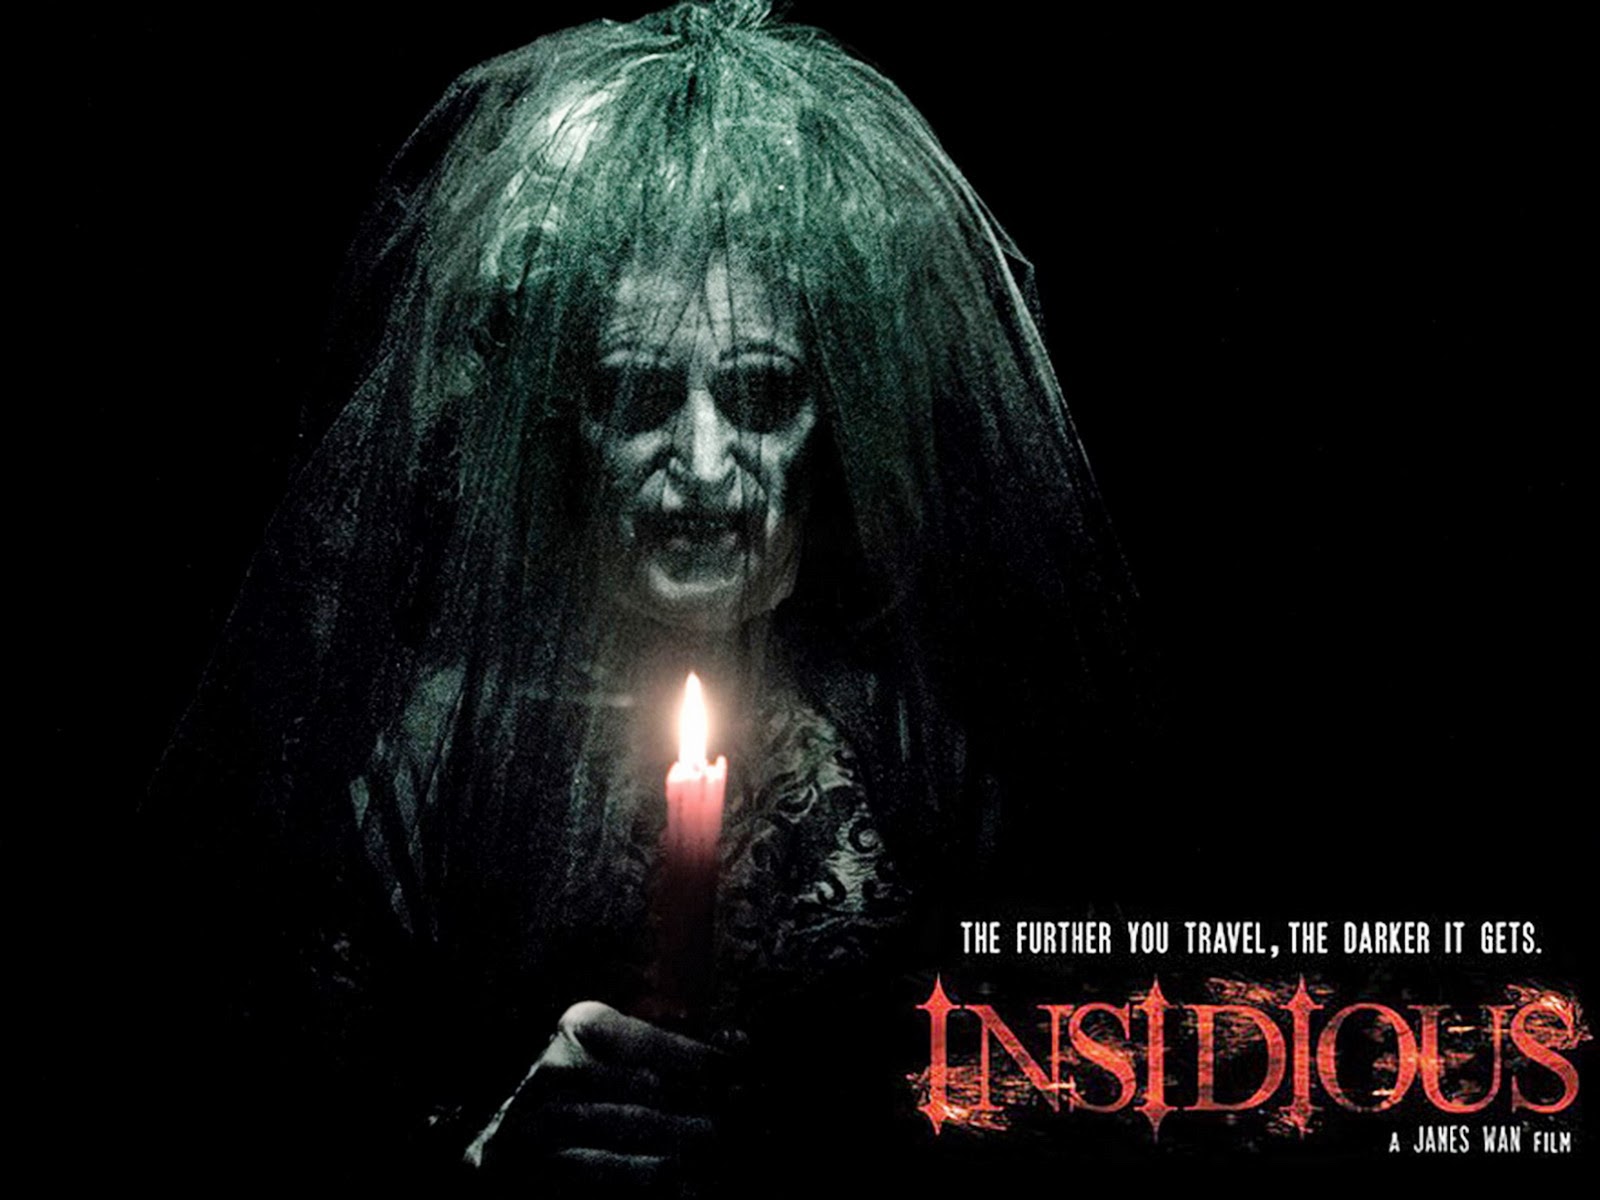 movie review of insidious the red door